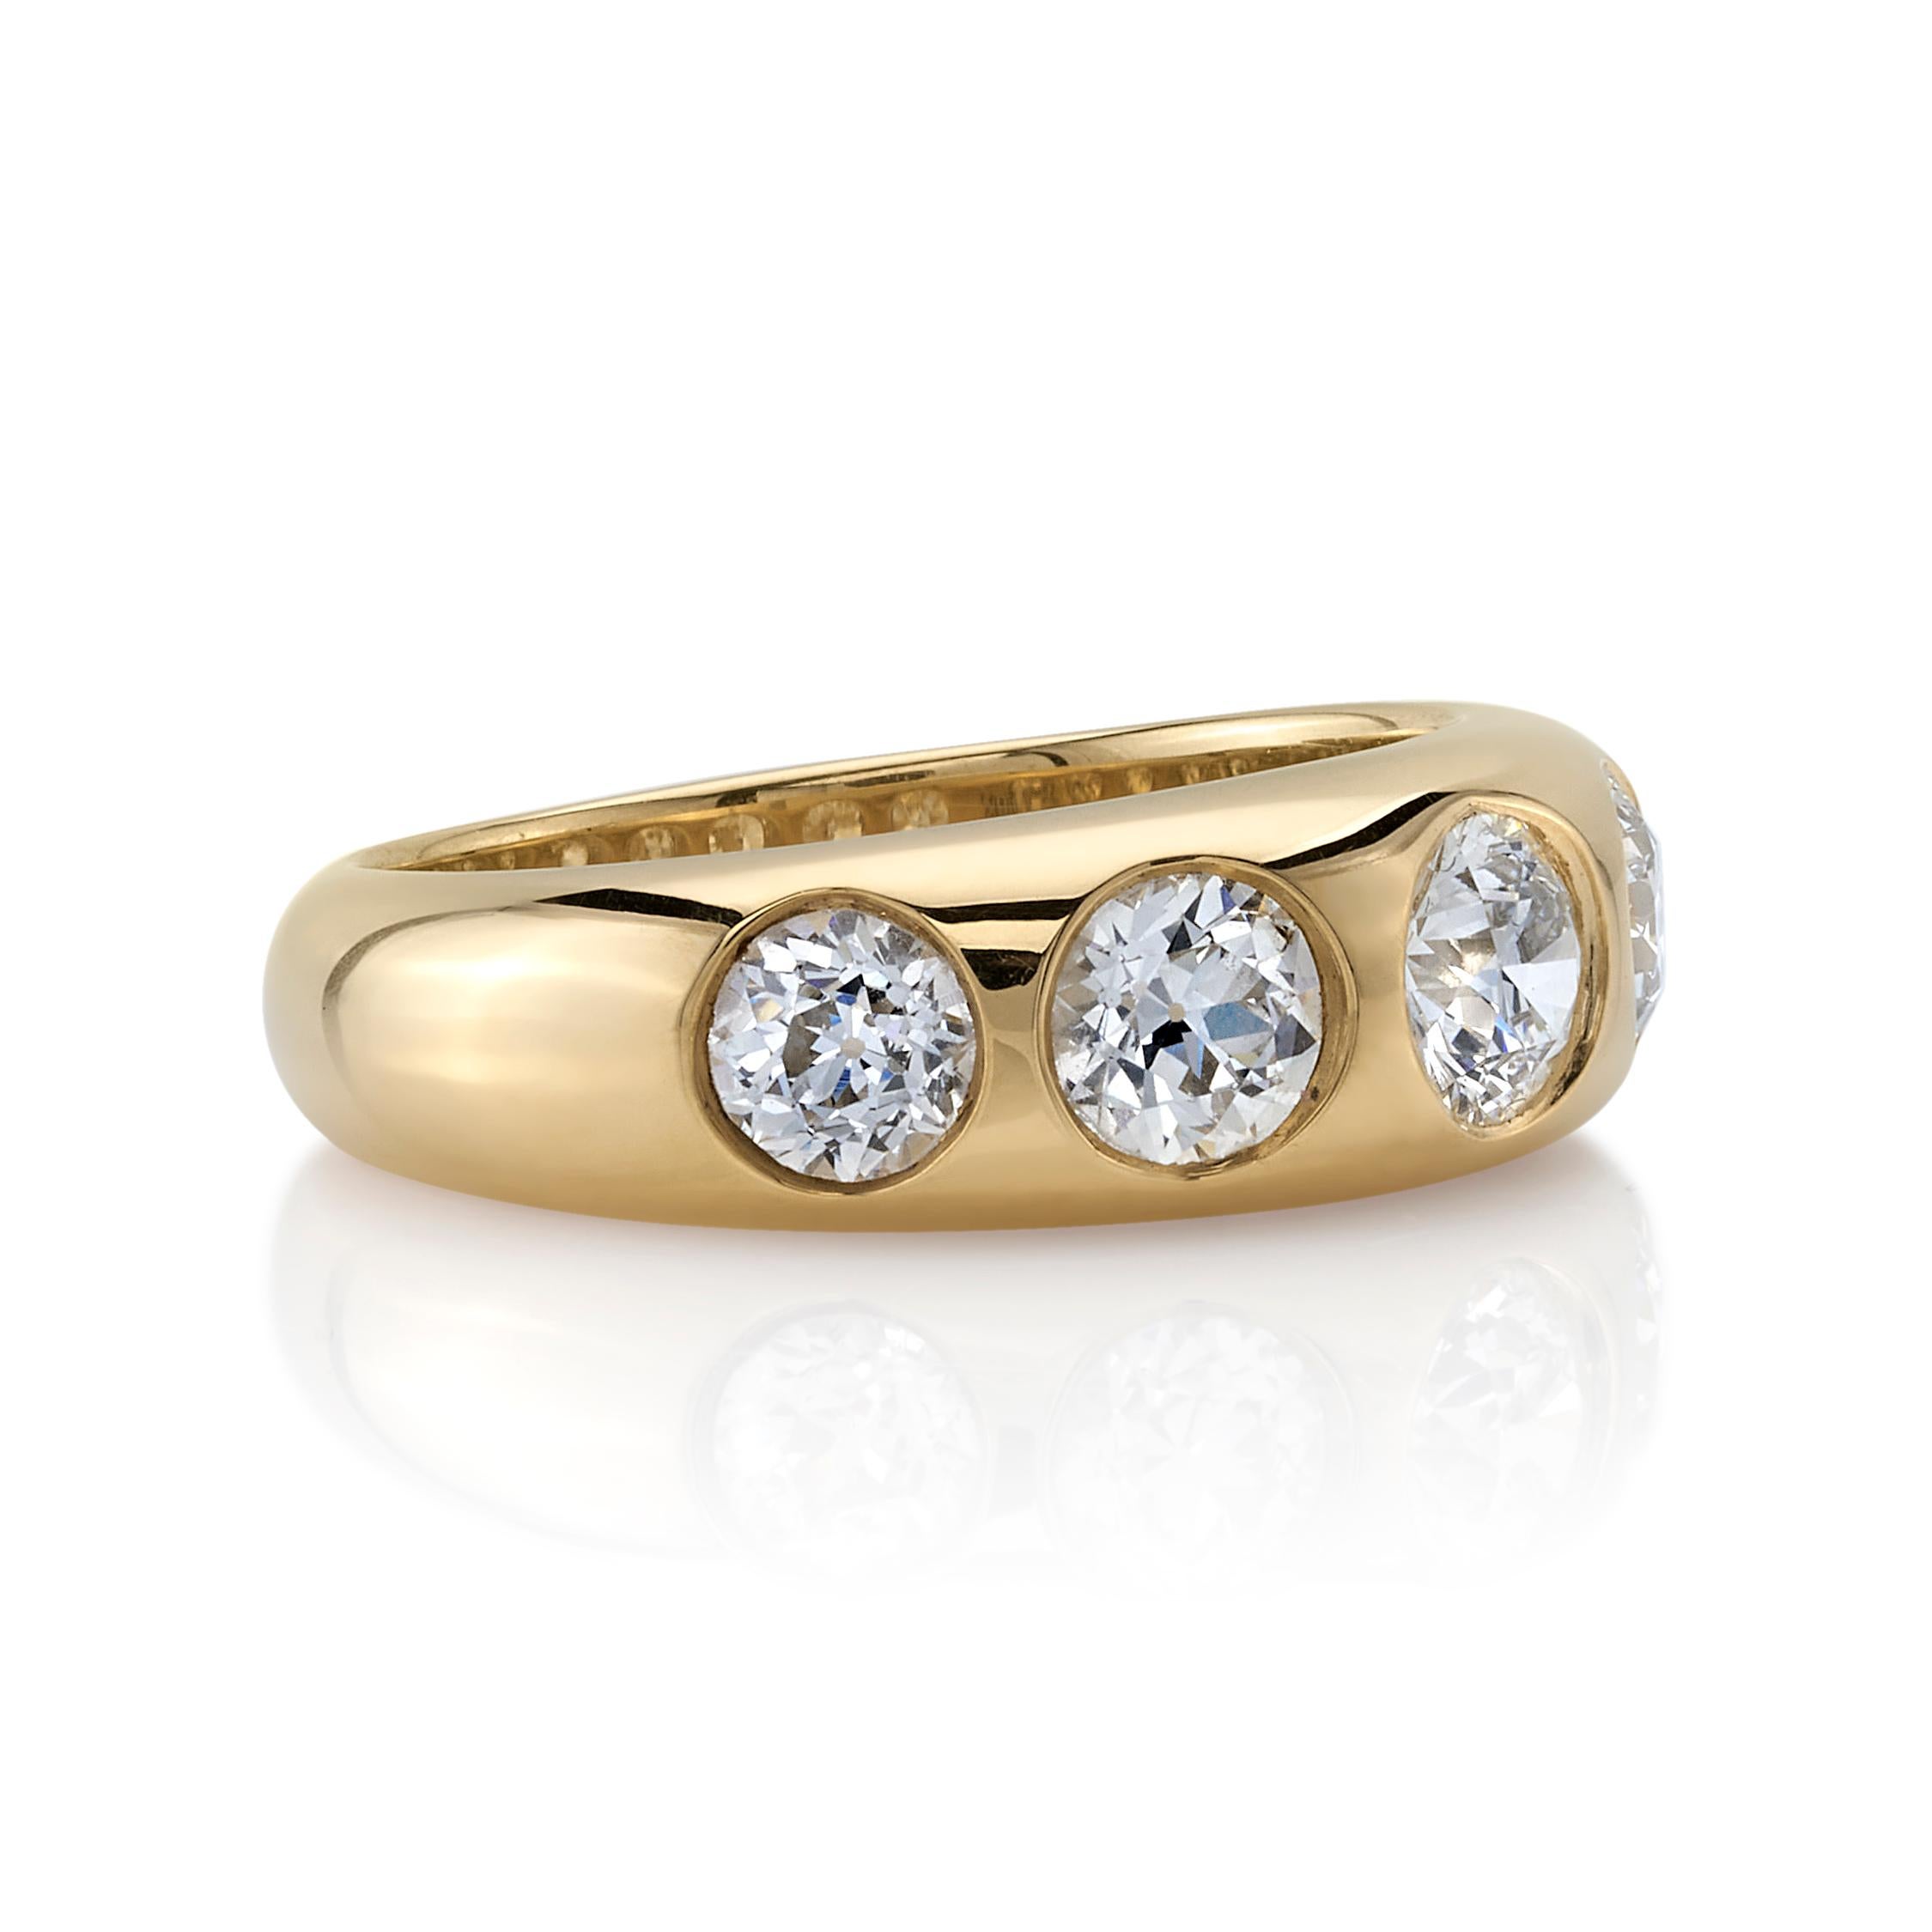 1.64ctw G-H/VS-SI old European cut diamonds set in a handcrafted 18K yellow gold band.

Ring is a currently a size 6 and can be sized to fit.